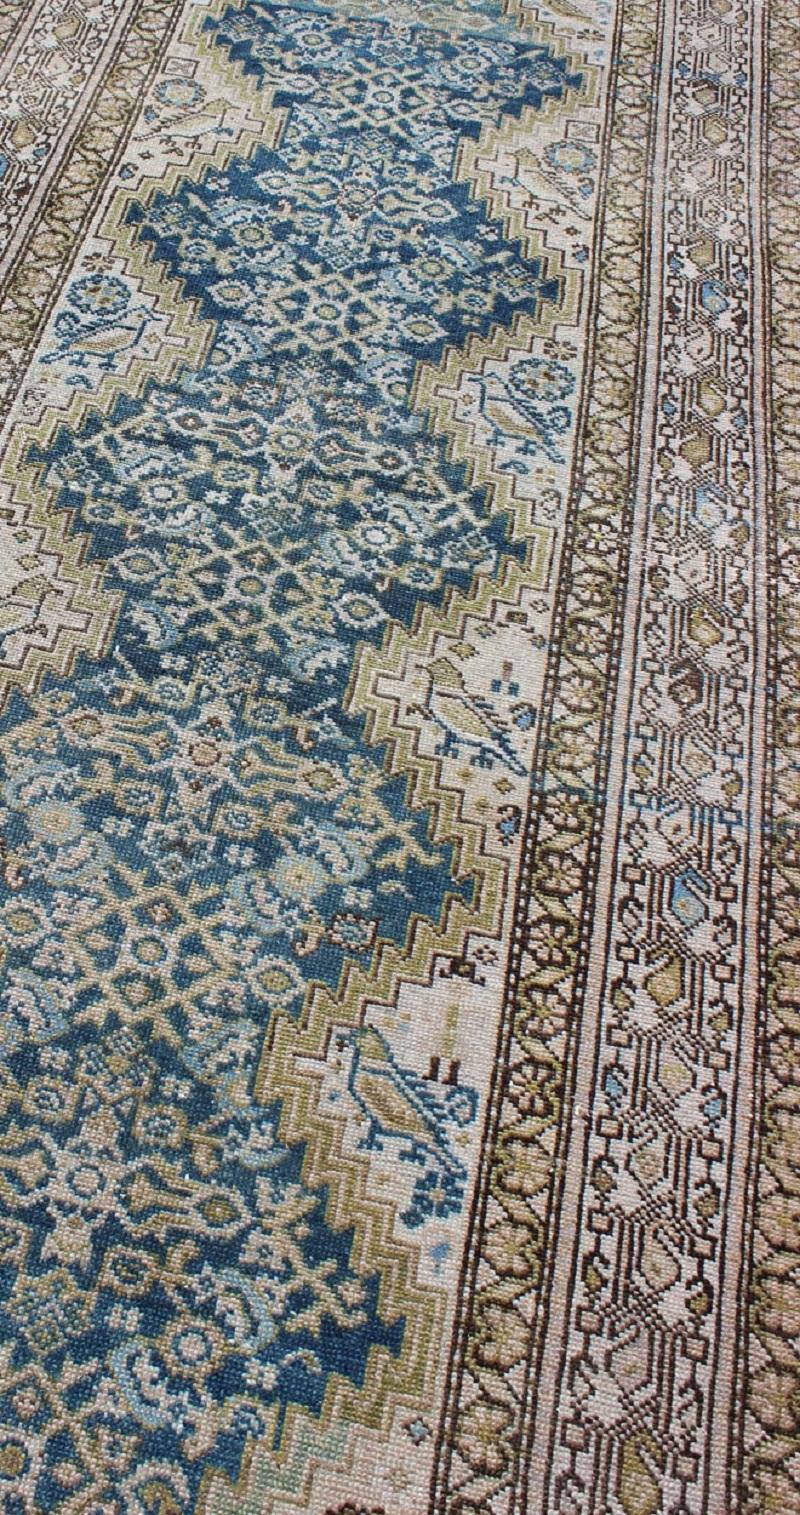 Early 20th Century Blue Green, Teal, Brown, Yellow and Yellow Green Antique Persian Malayer Runner